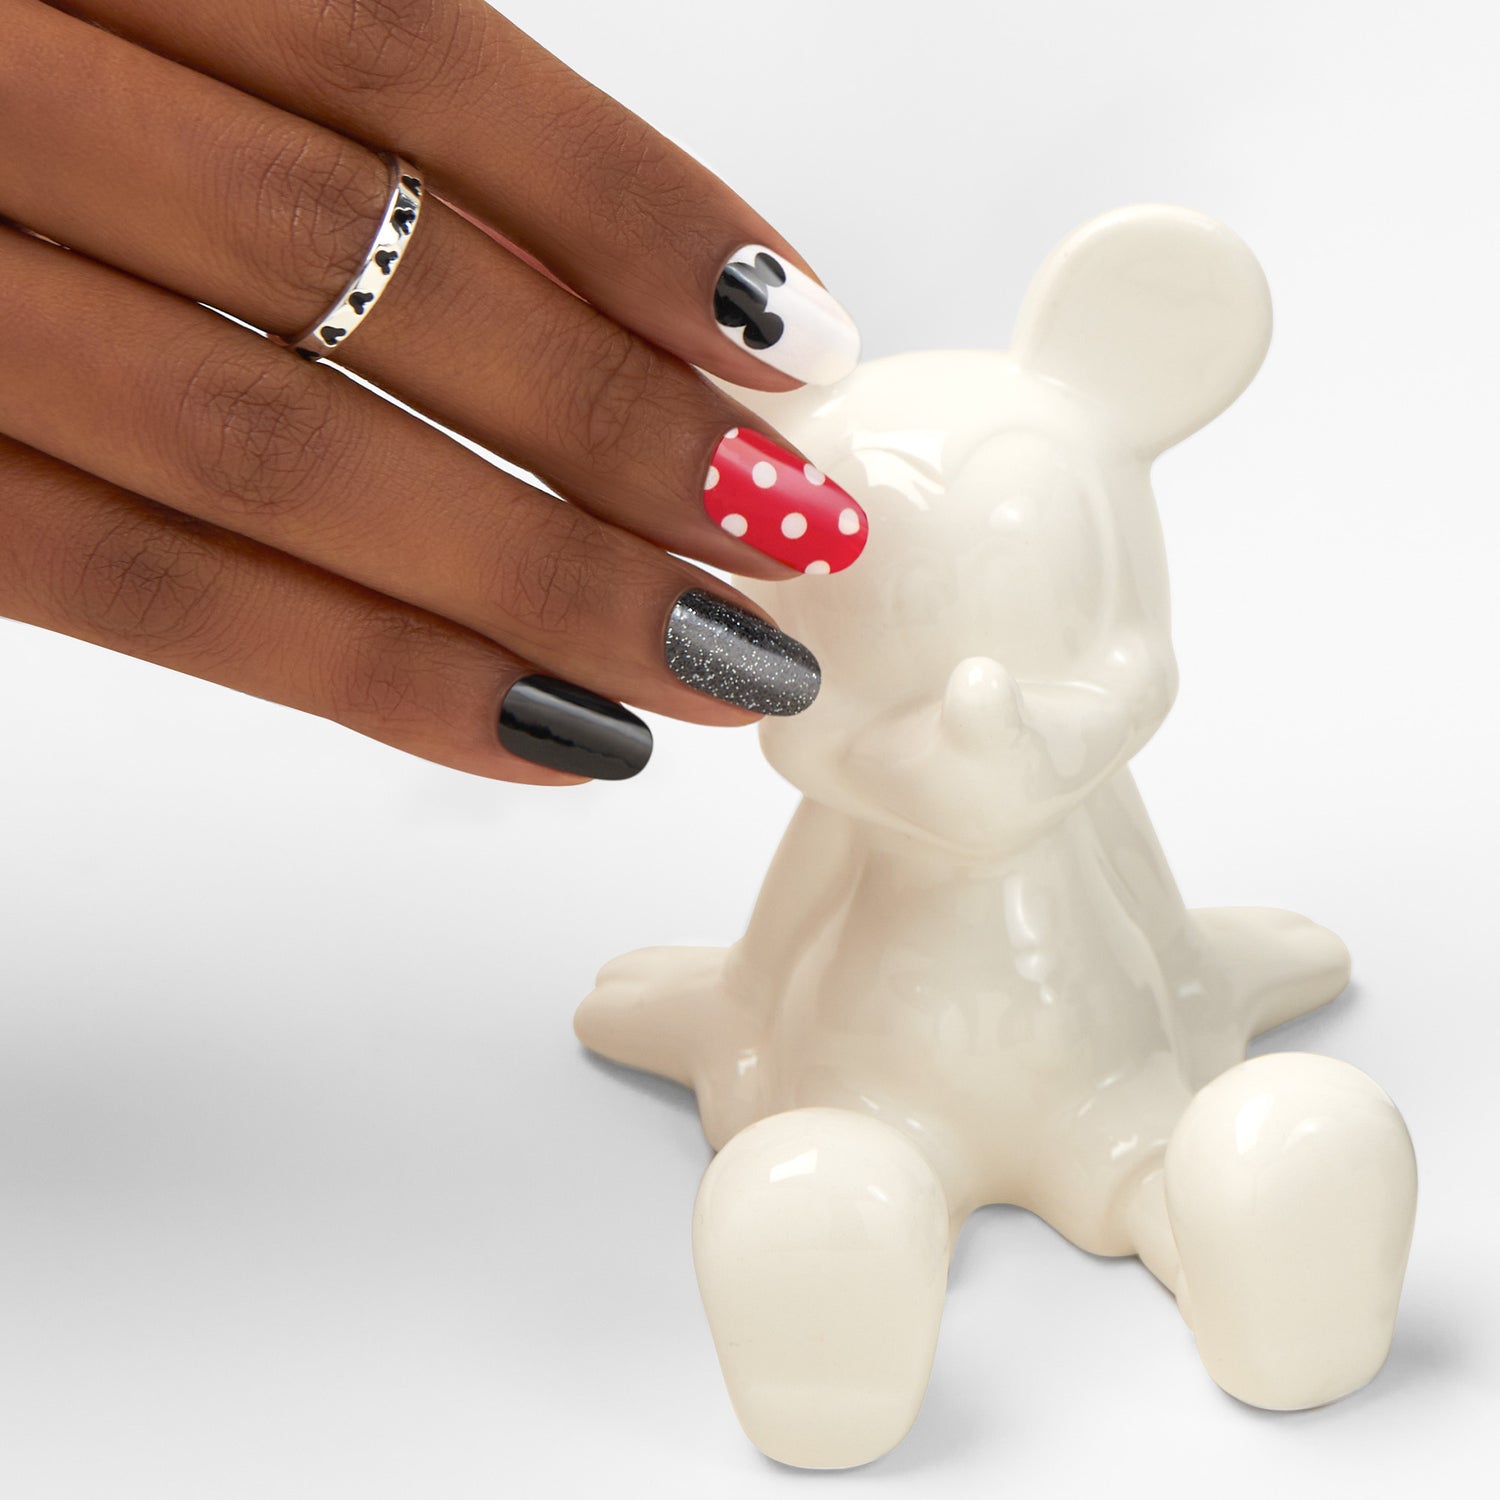 Black gel nail strips featuring red polka dots, mickey ears, and black glitter accents with a glossy, high-shine finish.  with white Mickey Mouse statue